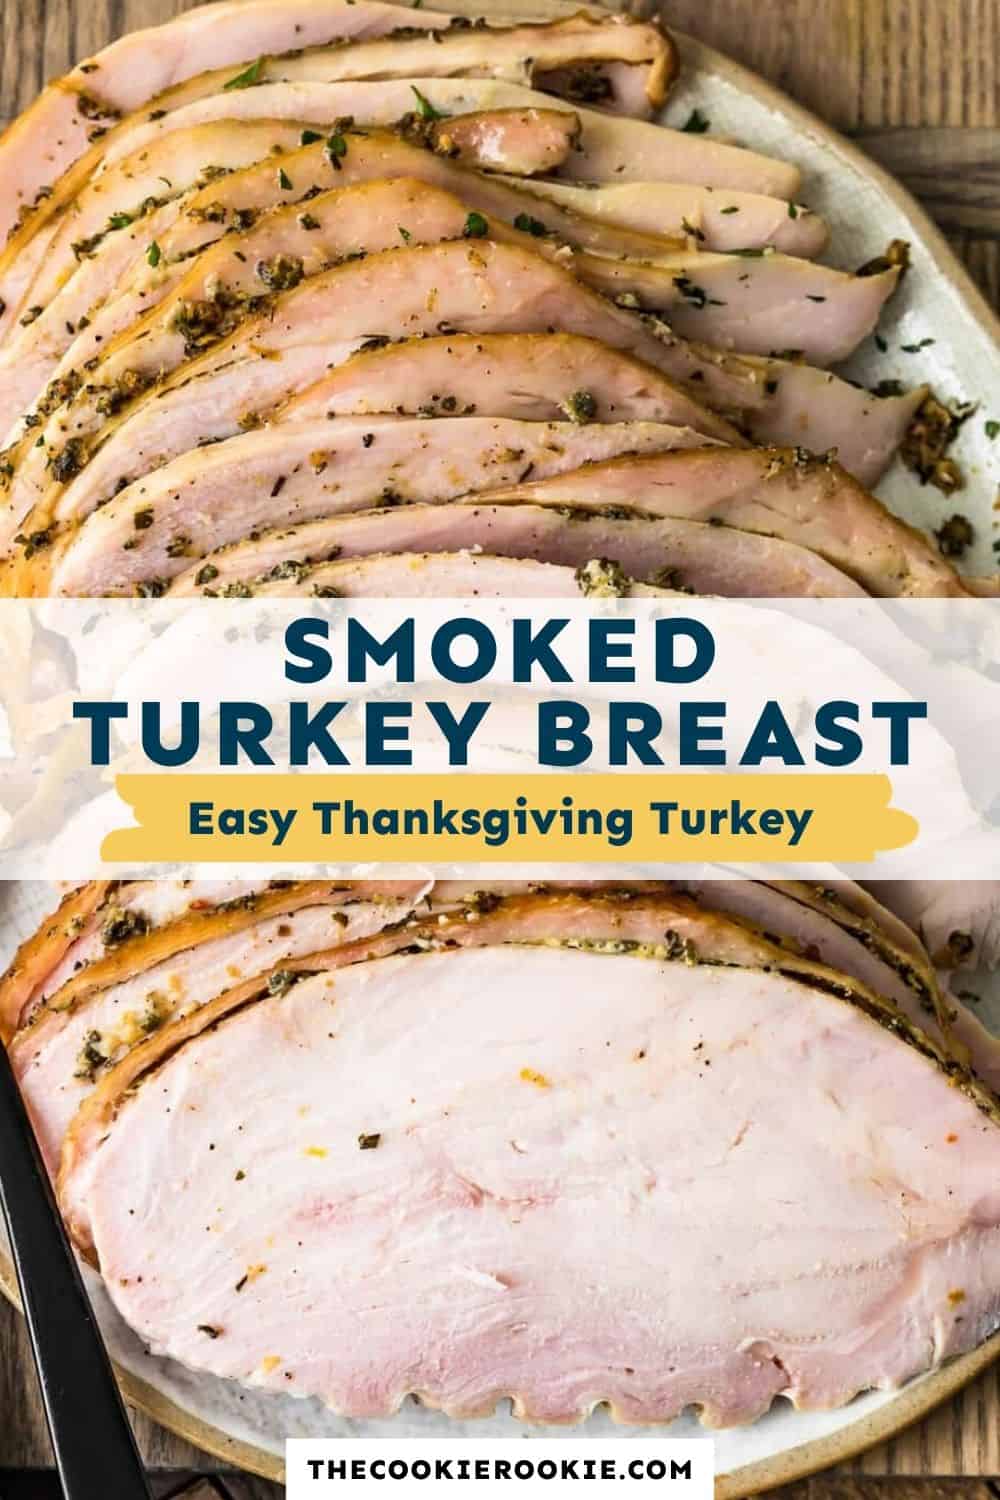 Smoked Turkey Breast Recipe (How To) | The Cookie Rookie